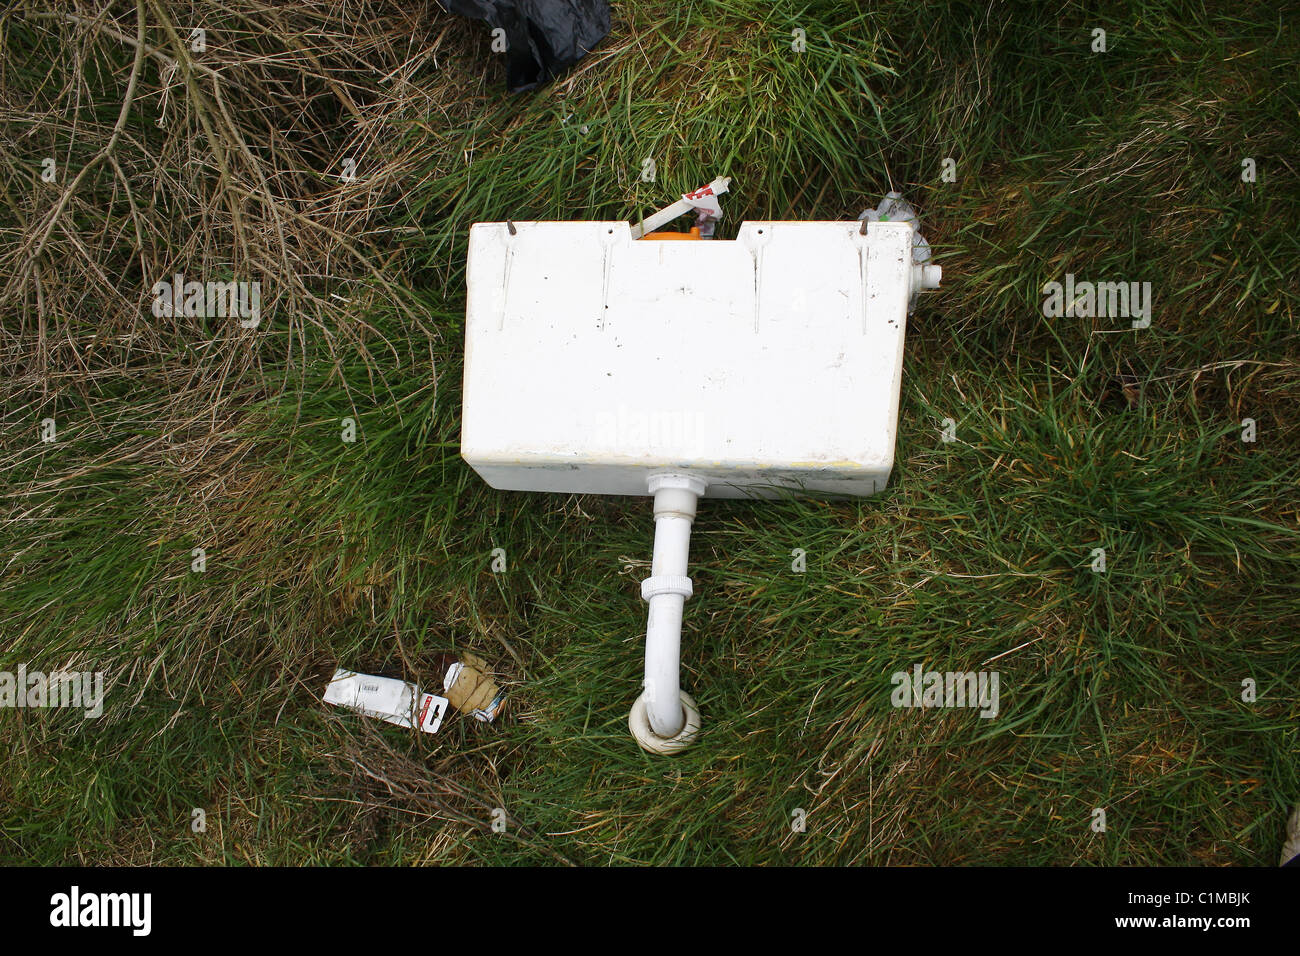 toilet cistern in grass Stock Photo